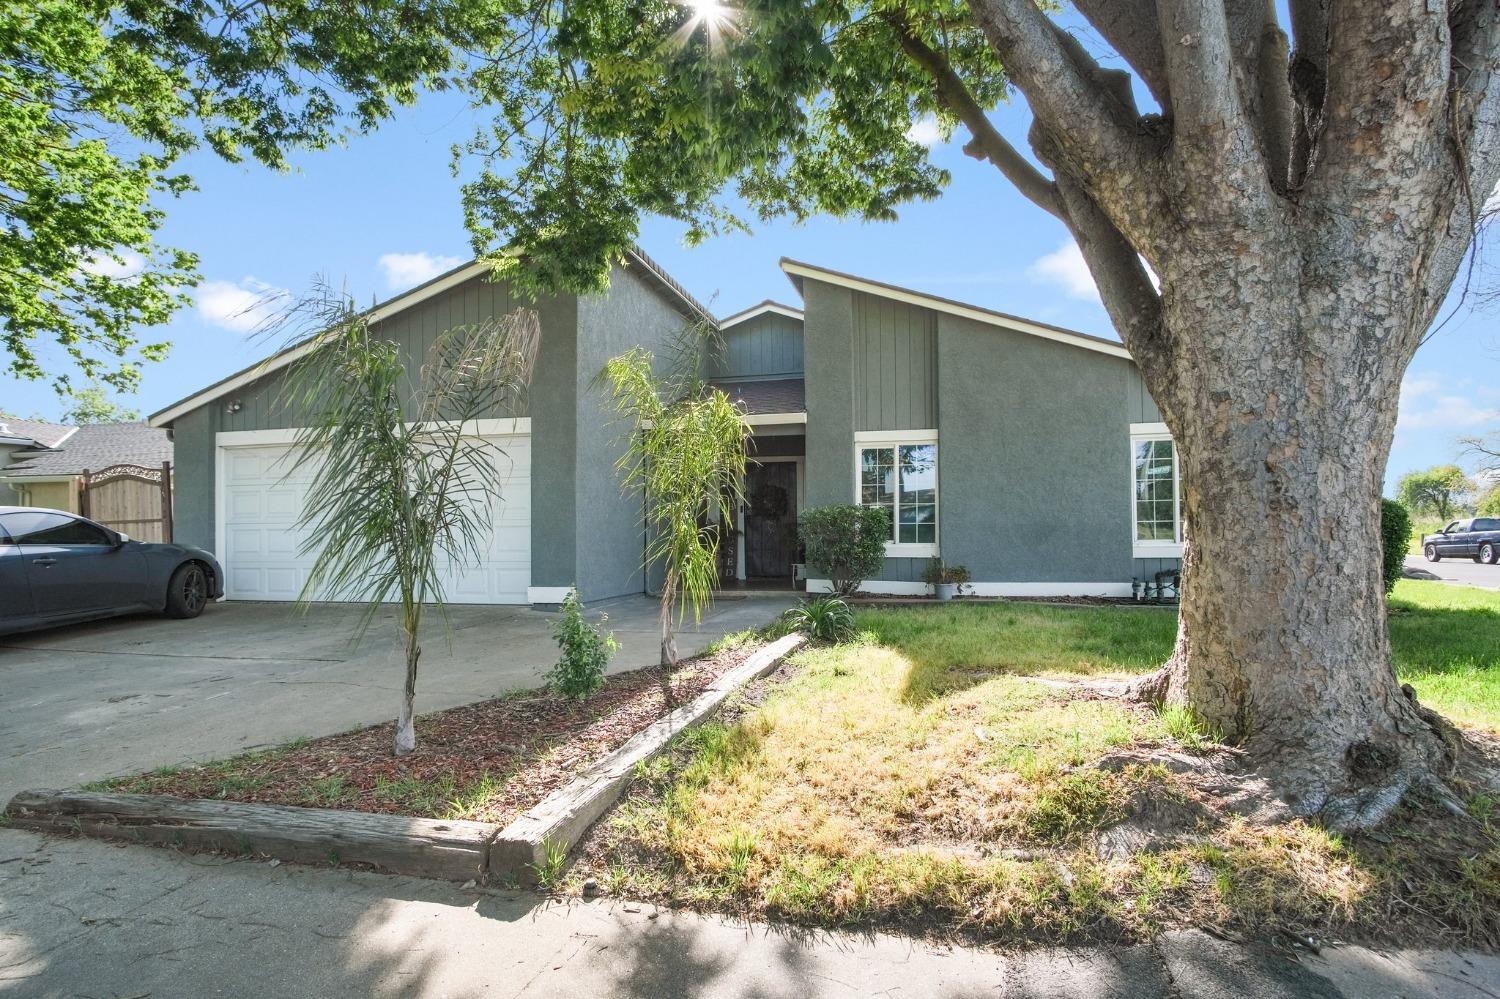 Photo of 629 Fort Henry Dr in Modesto, CA